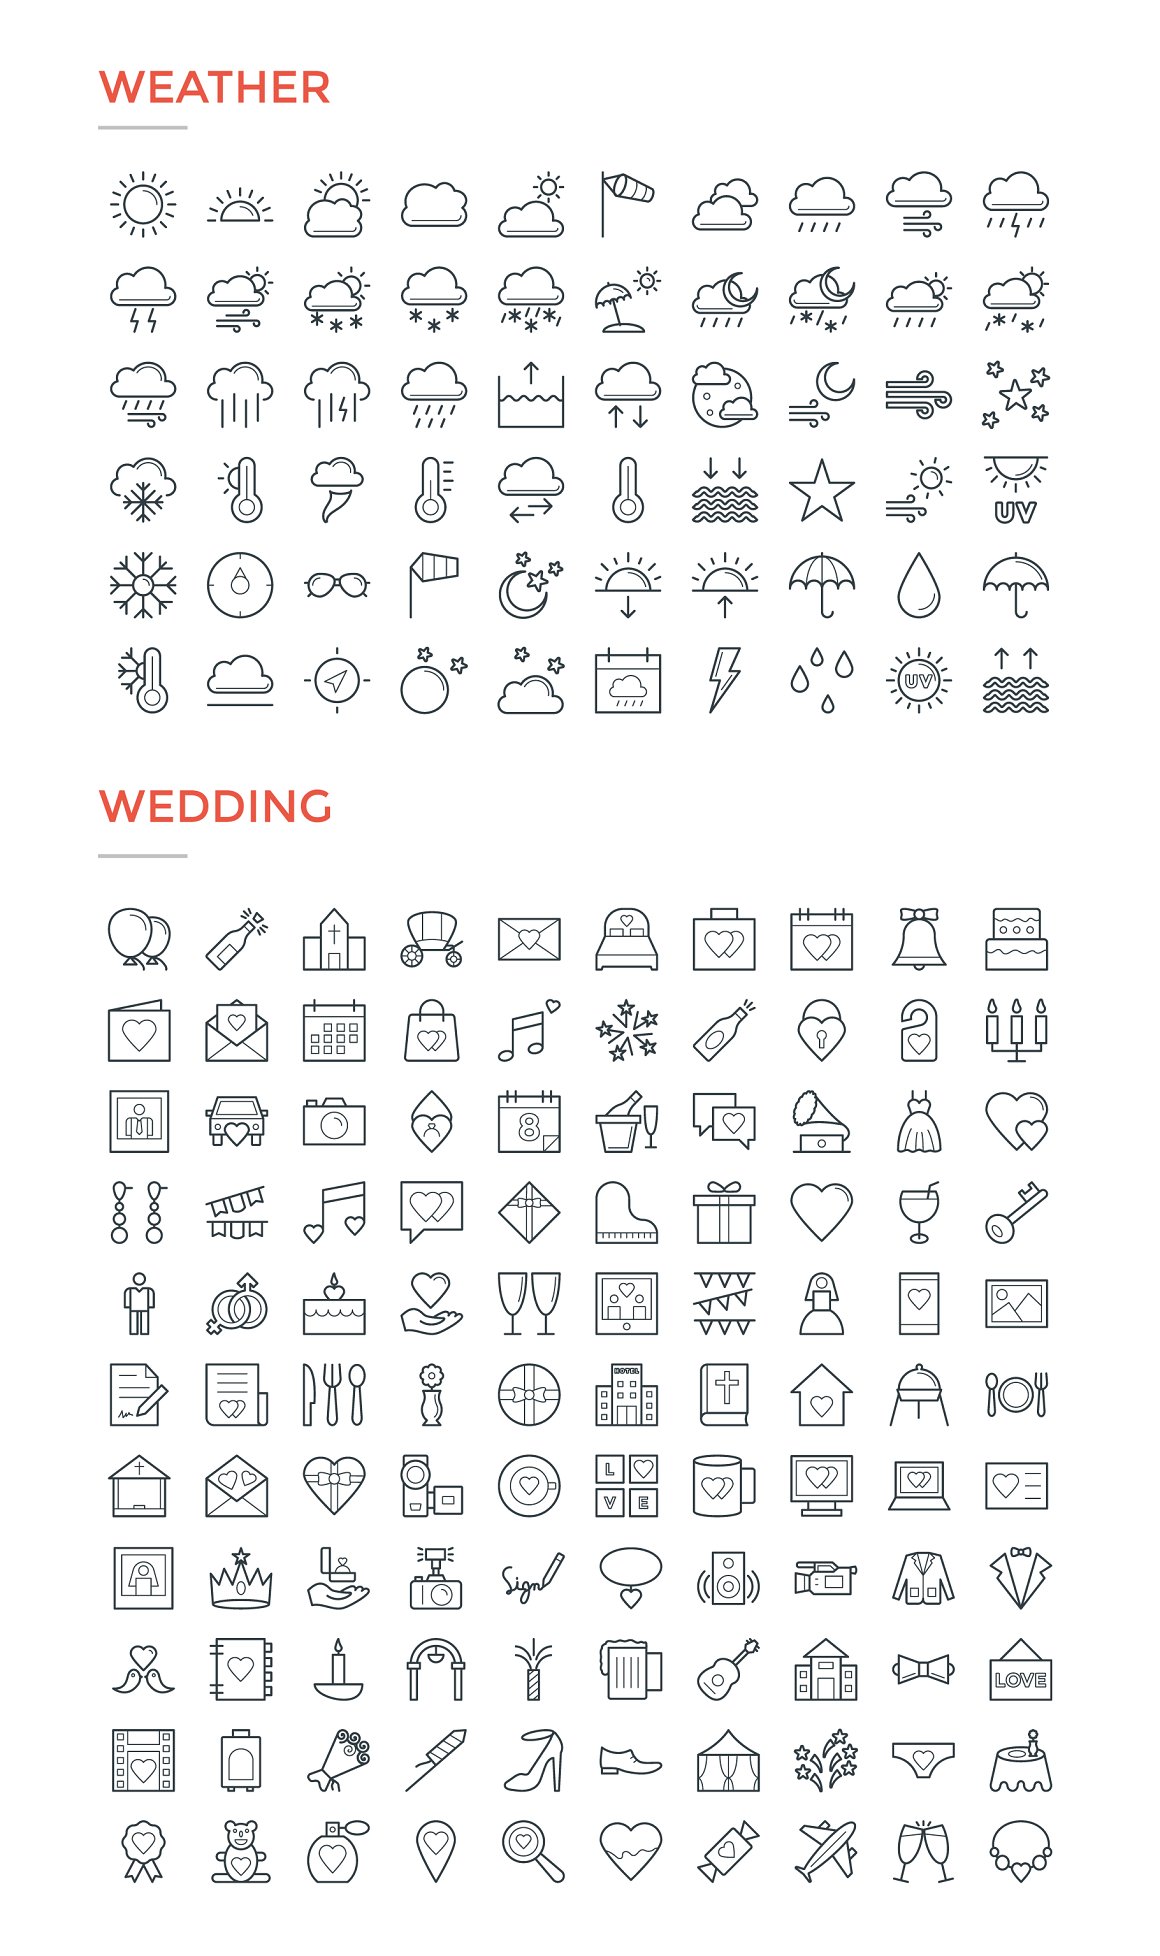 Clipart of black different weather and wedding icons on a white background.